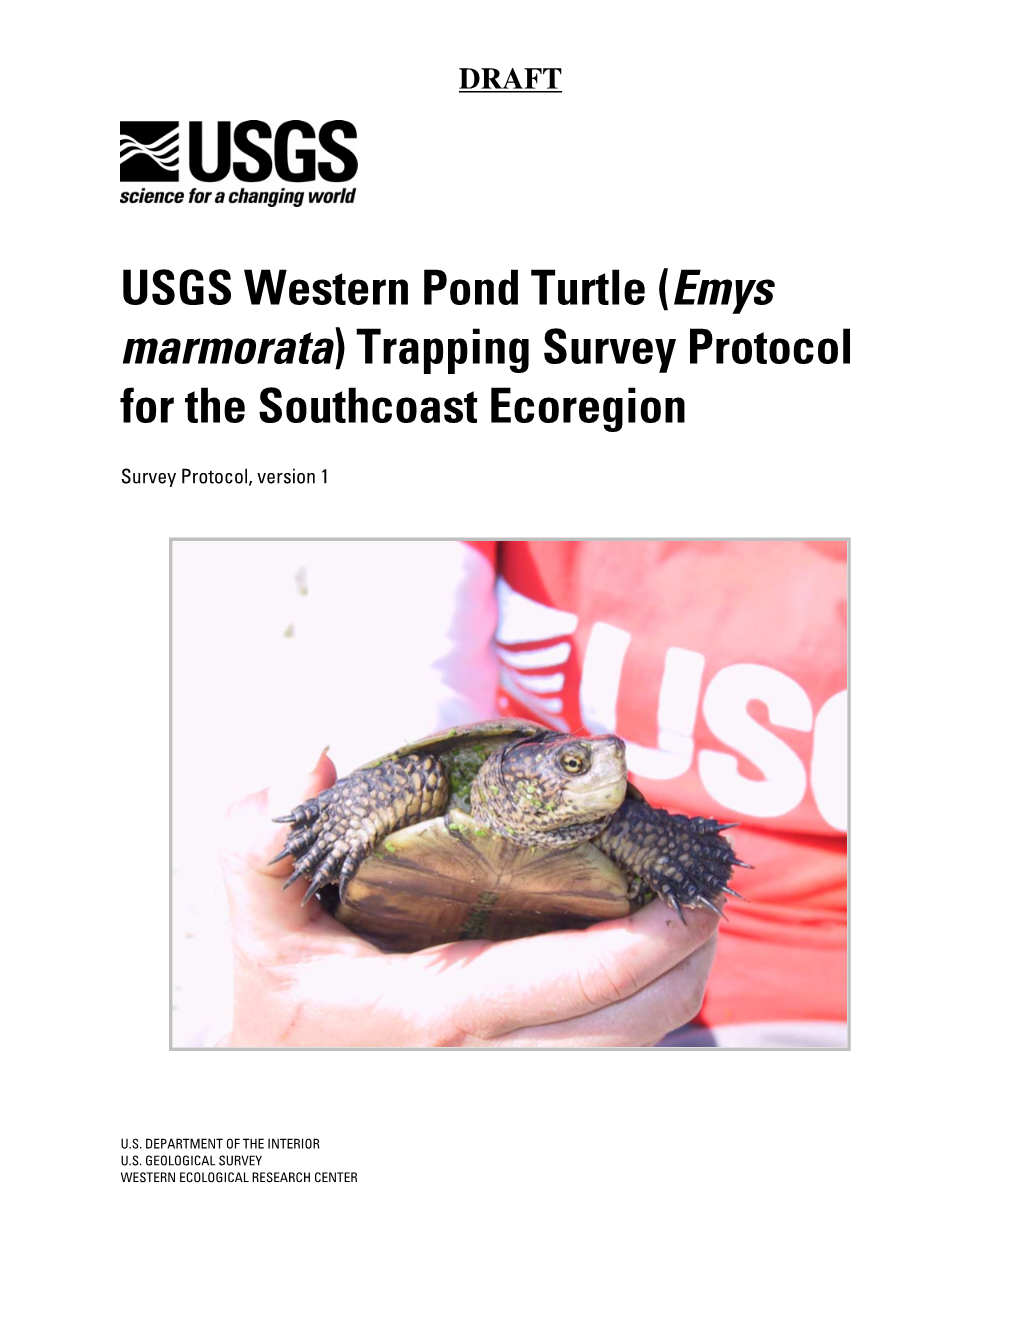 USGS Western Pond Turtle (Emys Marmorata) Trapping Survey Protocol for the Southcoast Ecoregion